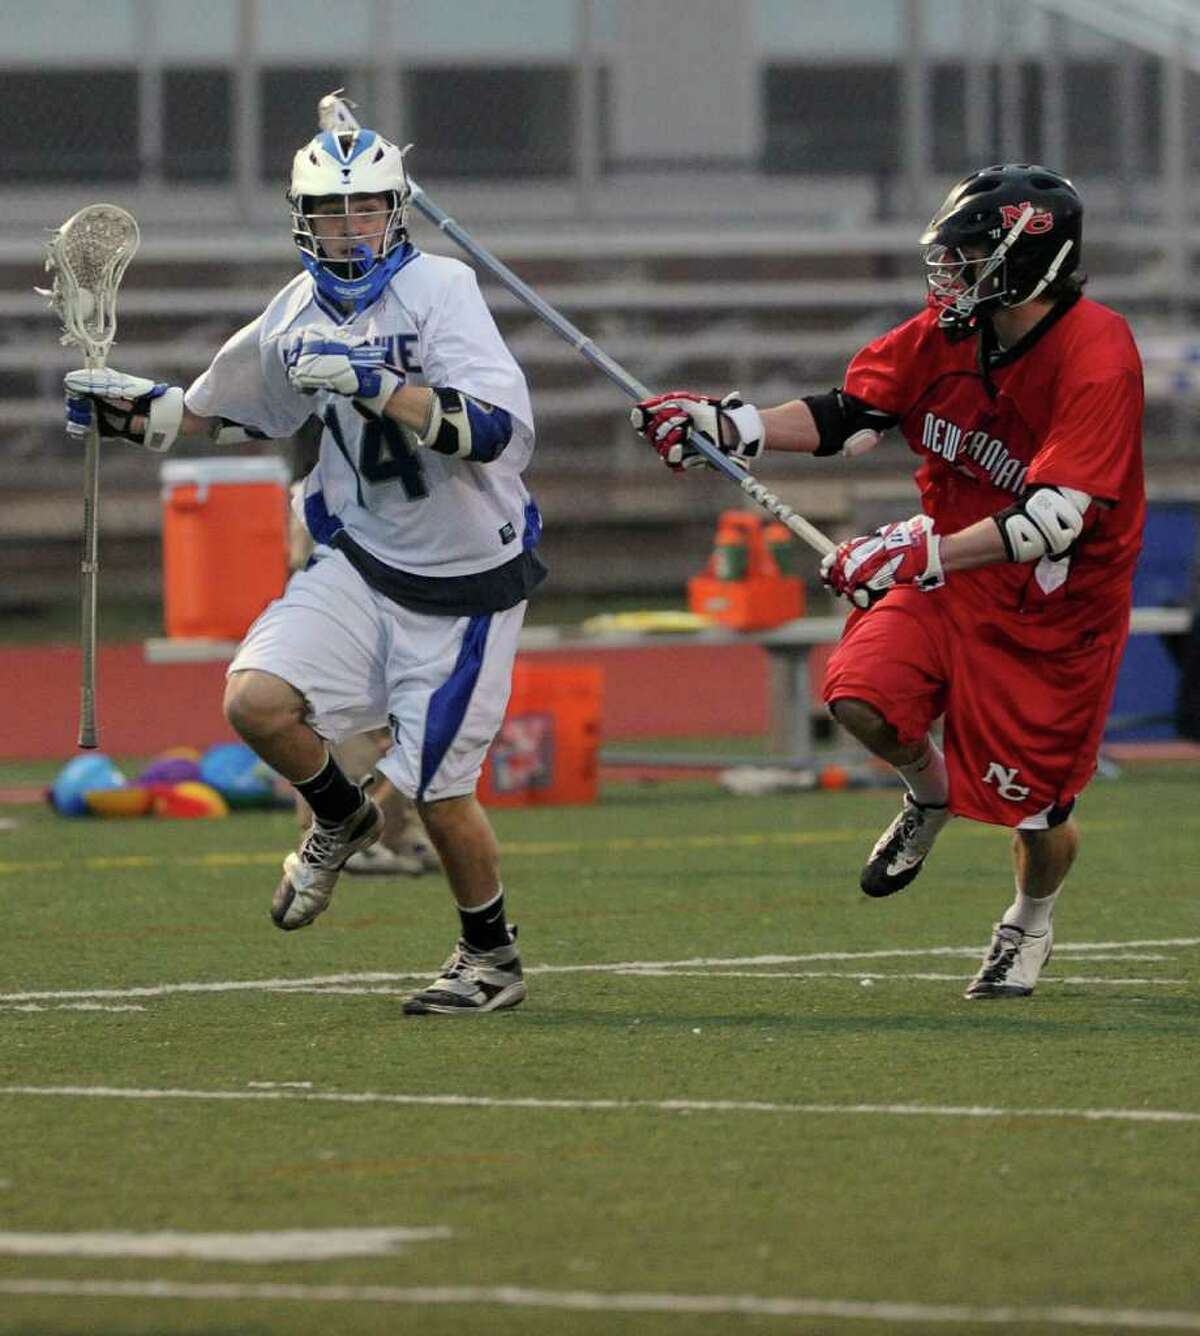 Ludlowe's Brooks Brown carries the ball as he is defended by New Canaan's Willie Gould during Wednesday's lacrosse game against New Canaan at Fairfield Ludlowe High School on April 27, 2011.